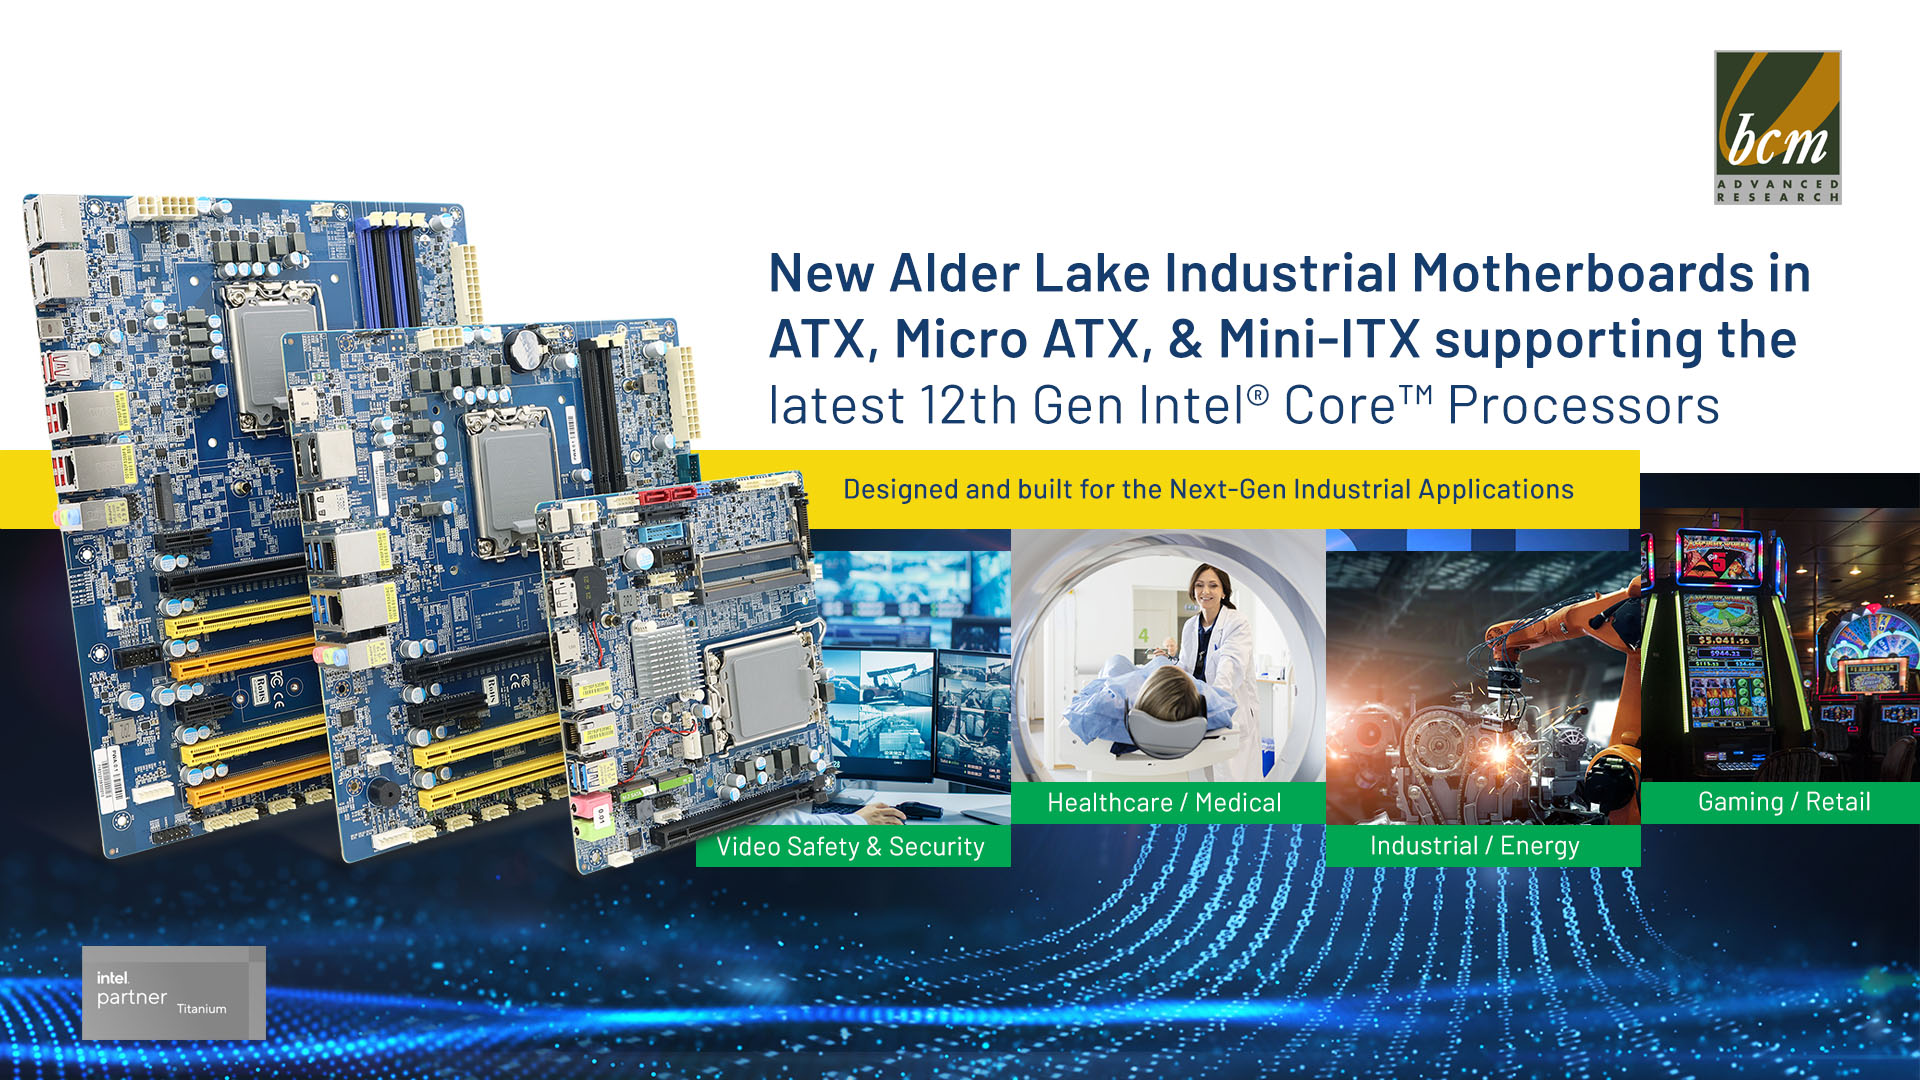 BCM launches six industrial motherboards built with the 12th Gen Intel® Core™ Processor family, codenamed, Alder Lake